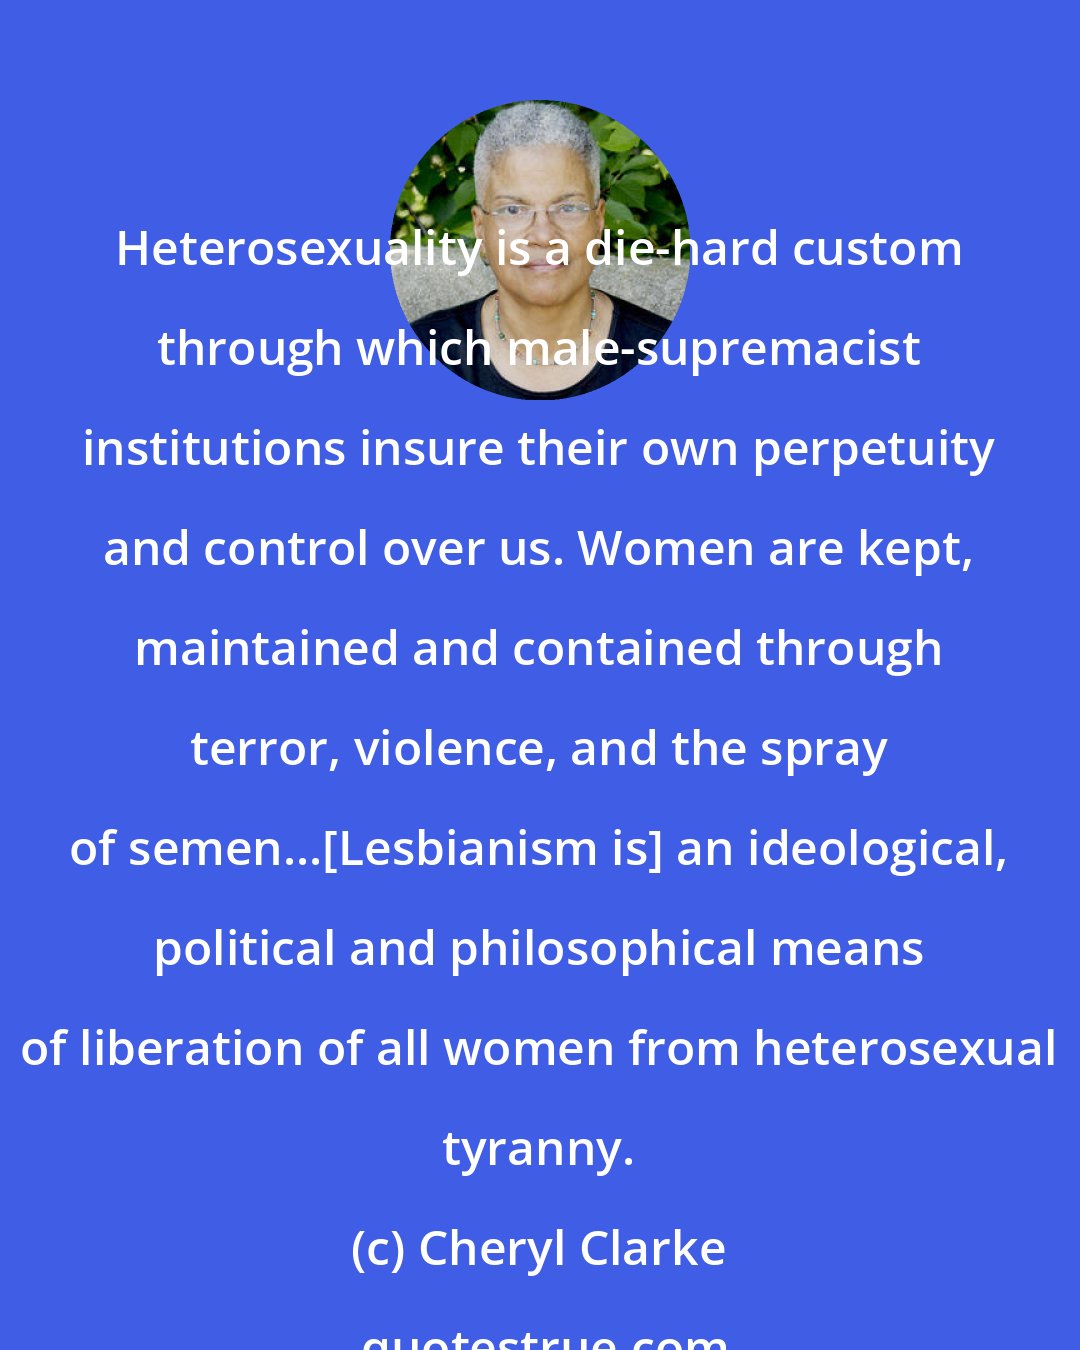 Cheryl Clarke: Heterosexuality is a die-hard custom through which male-supremacist institutions insure their own perpetuity and control over us. Women are kept, maintained and contained through terror, violence, and the spray of semen...[Lesbianism is] an ideological, political and philosophical means of liberation of all women from heterosexual tyranny.